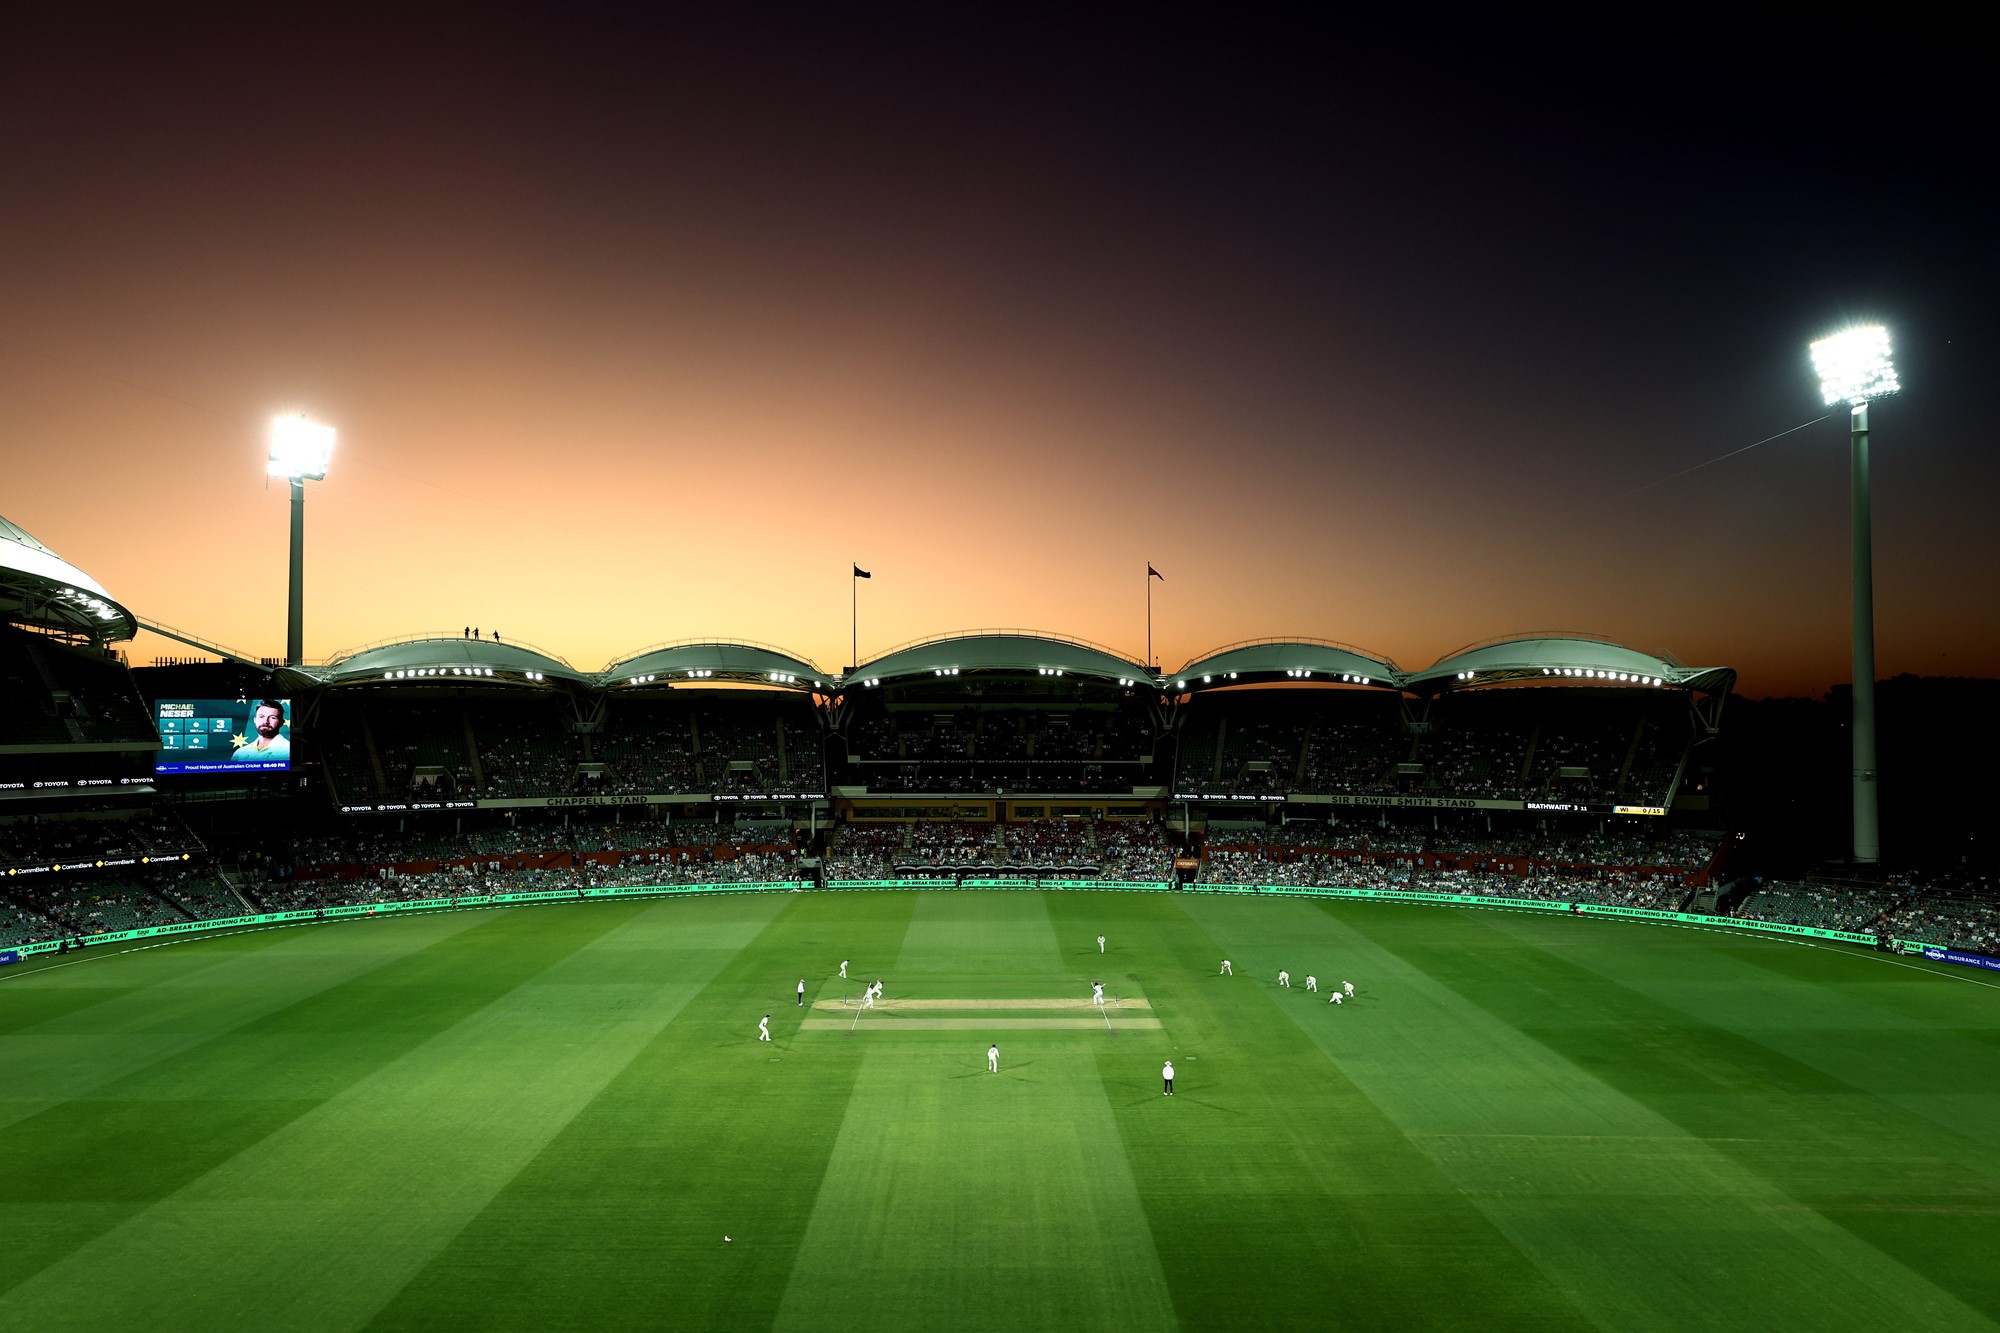 The lights are on at Adelaide Oval